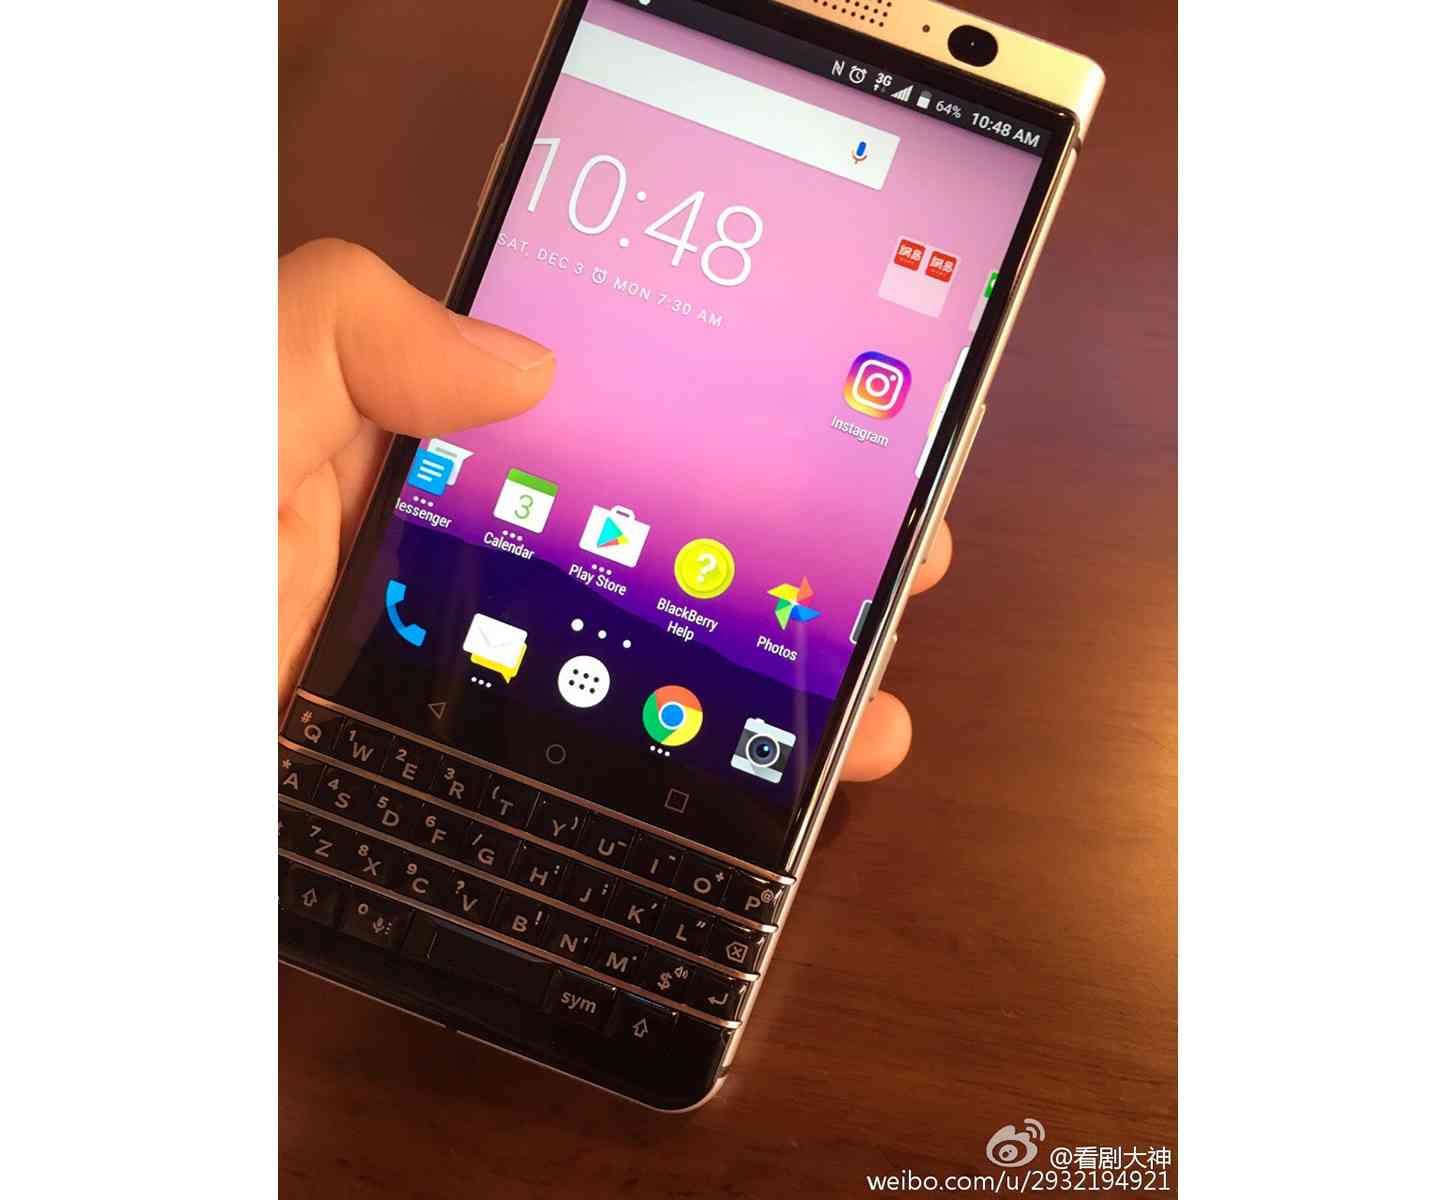 BlackBerry QWERTY Android phone photo leak